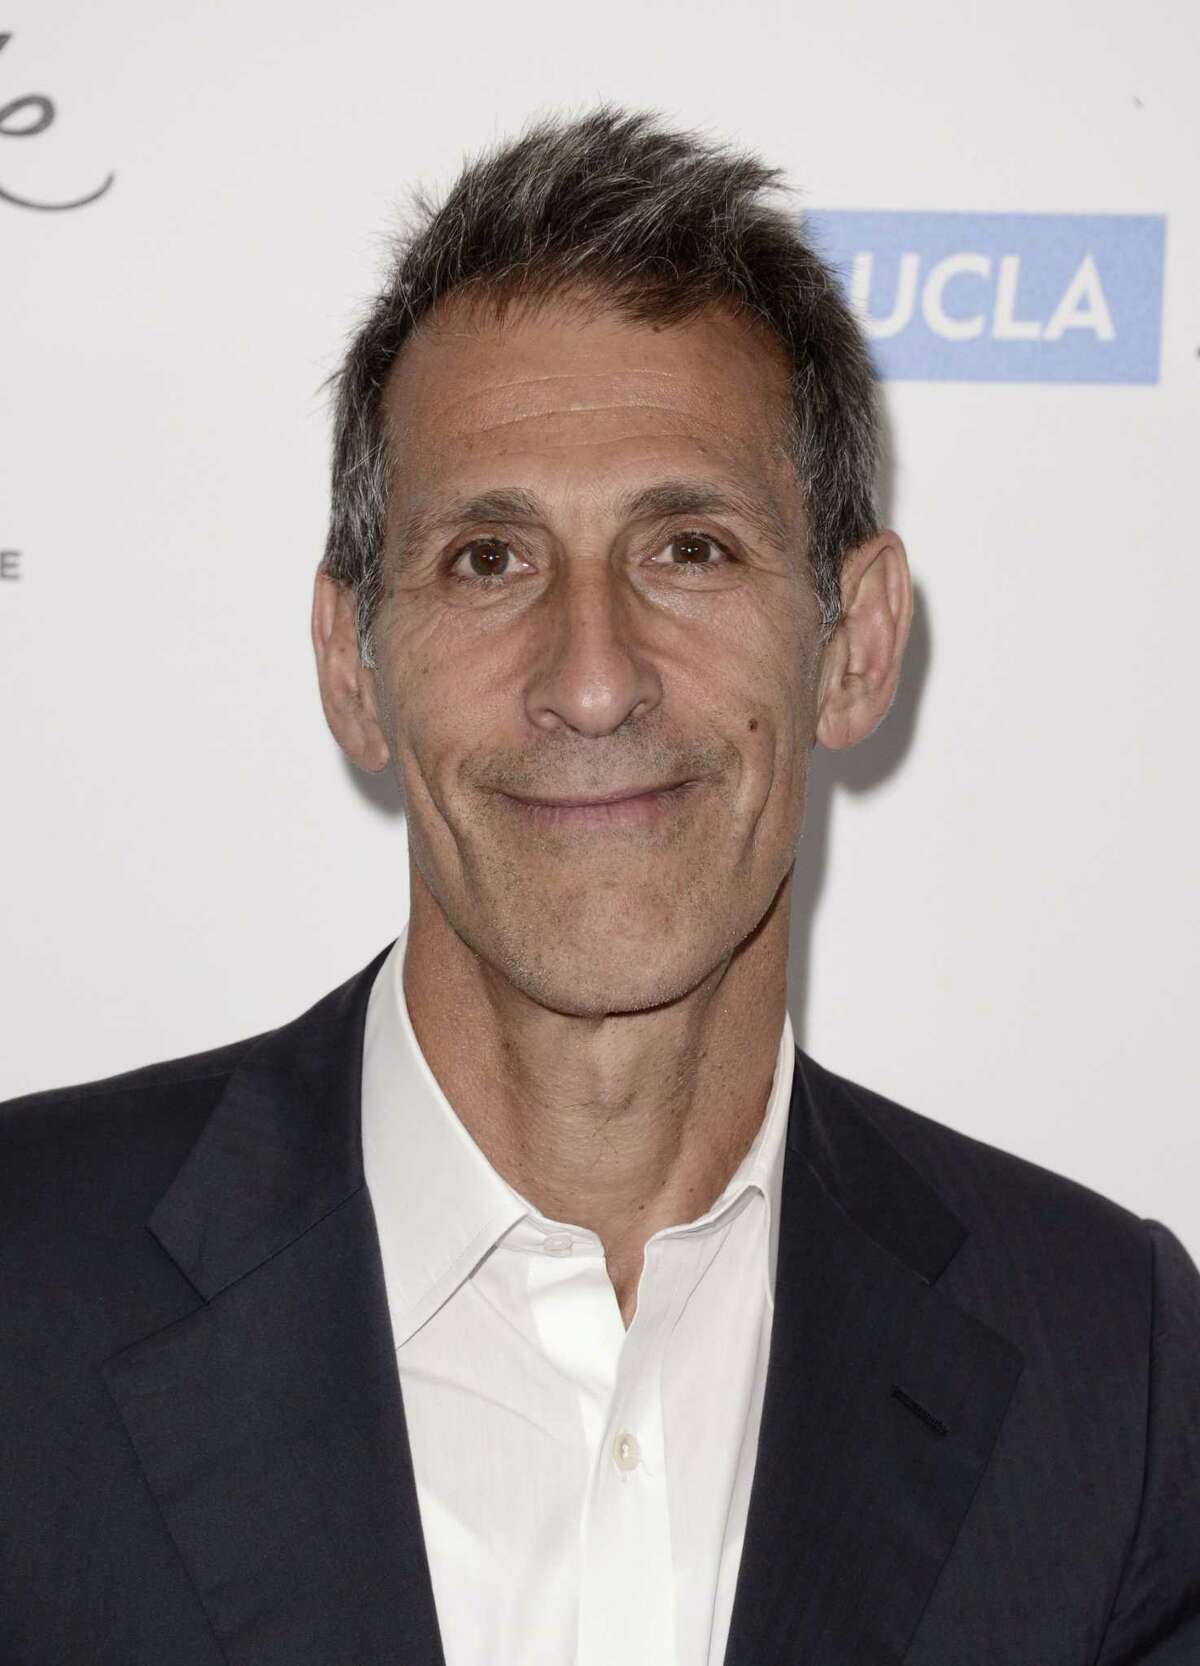 FILE - In this April 25, 2014 file photo, Michael Lynton, chairman and CEO, Sony Pictures Entertainment, arrives at the 19th annual "Taste For A Cure" at the Beverly Wilshire Hotel, in Beverly Hills, Calif. More than six weeks after hackers attacked Sony Pictures Entertainment, its computer network is still down but the studio has not lost a single day of production on any of its films or television, Lynton told The Associated Press on Thursday, Jan. 8, 2015. In a wide-ranging interview Lynton talked about the companyís isolation and the uncertainty that was created by the pre-Thanksgiving attack, which the U.S. government has attributed to North Korea. (Photo by Dan Steinberg/Invision/AP, File)